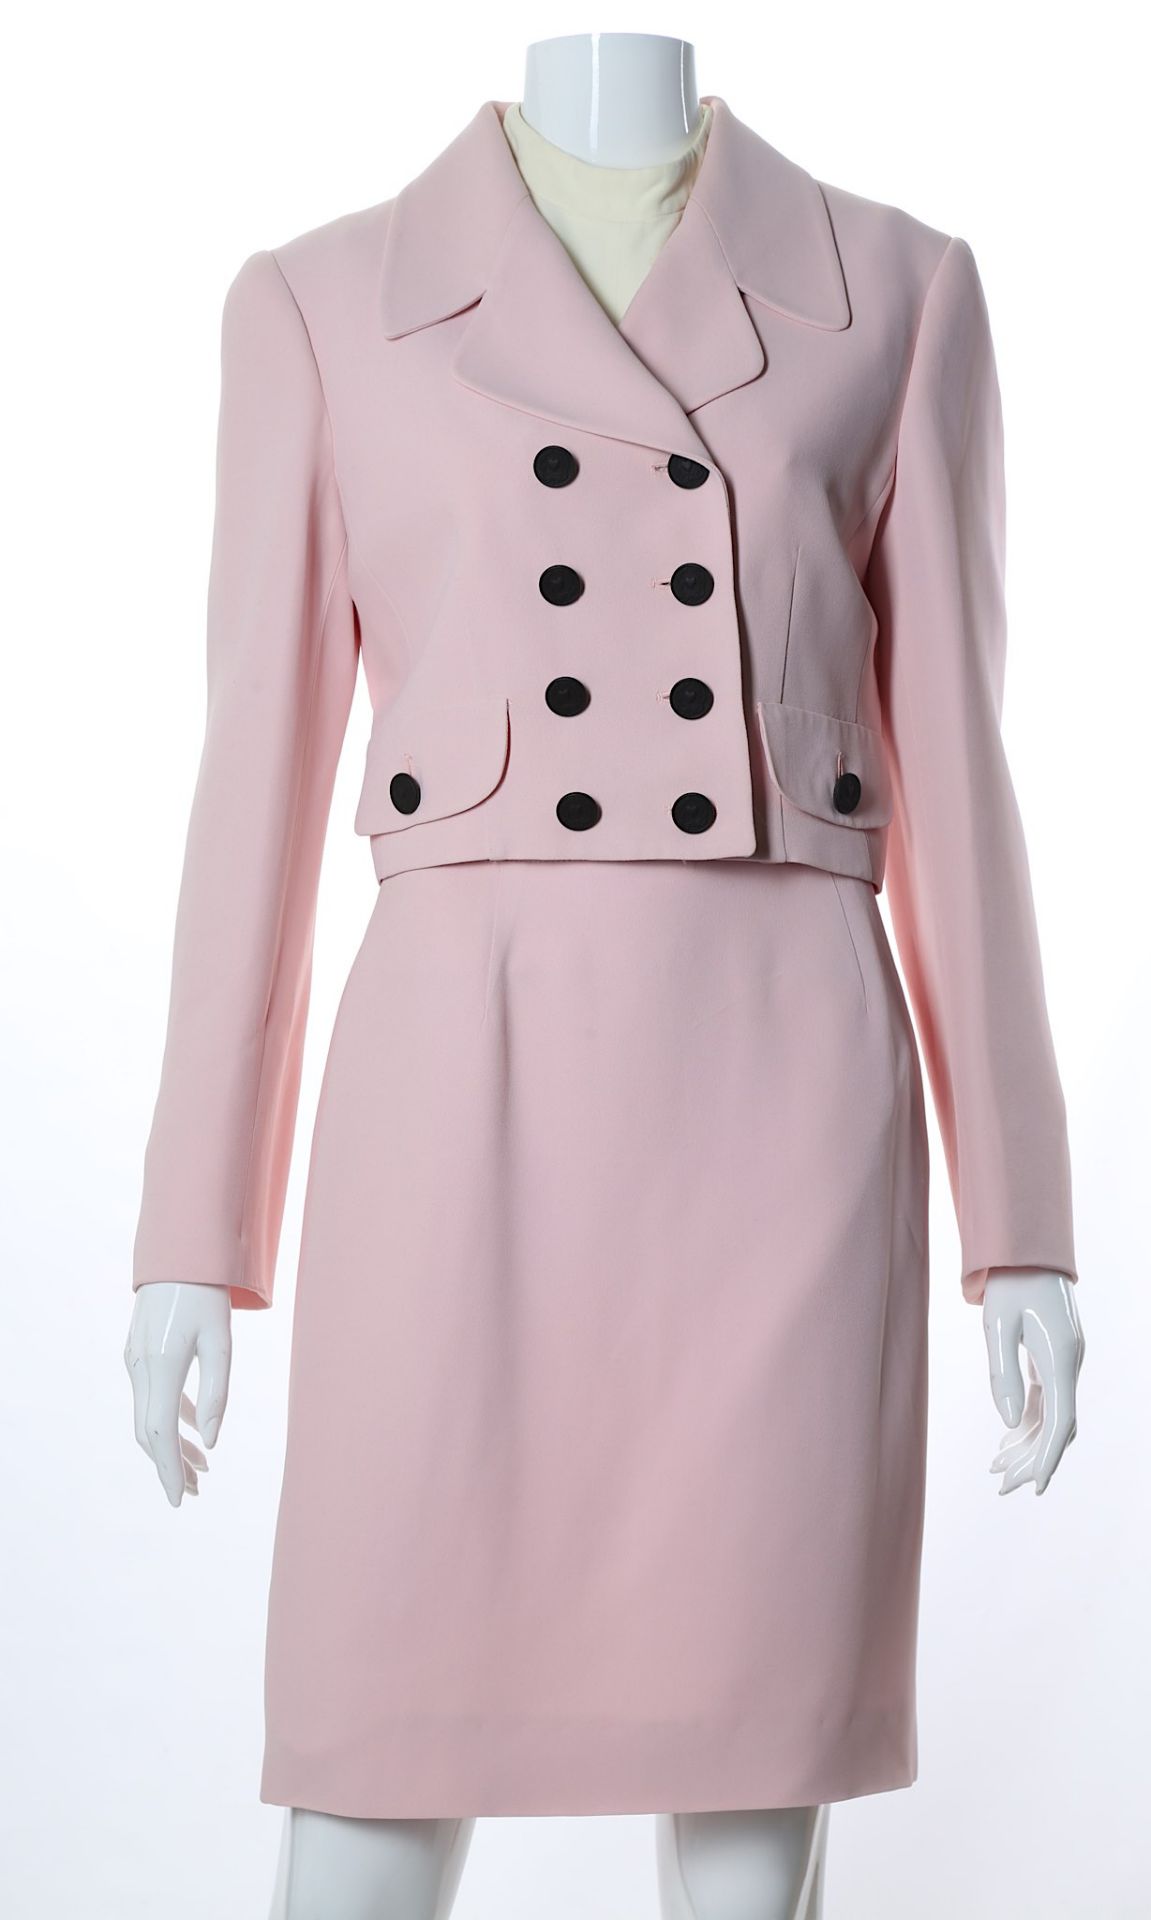 Moschino Cheap and Chic Pink Skirt Suit, 1990s, wi - Image 2 of 10